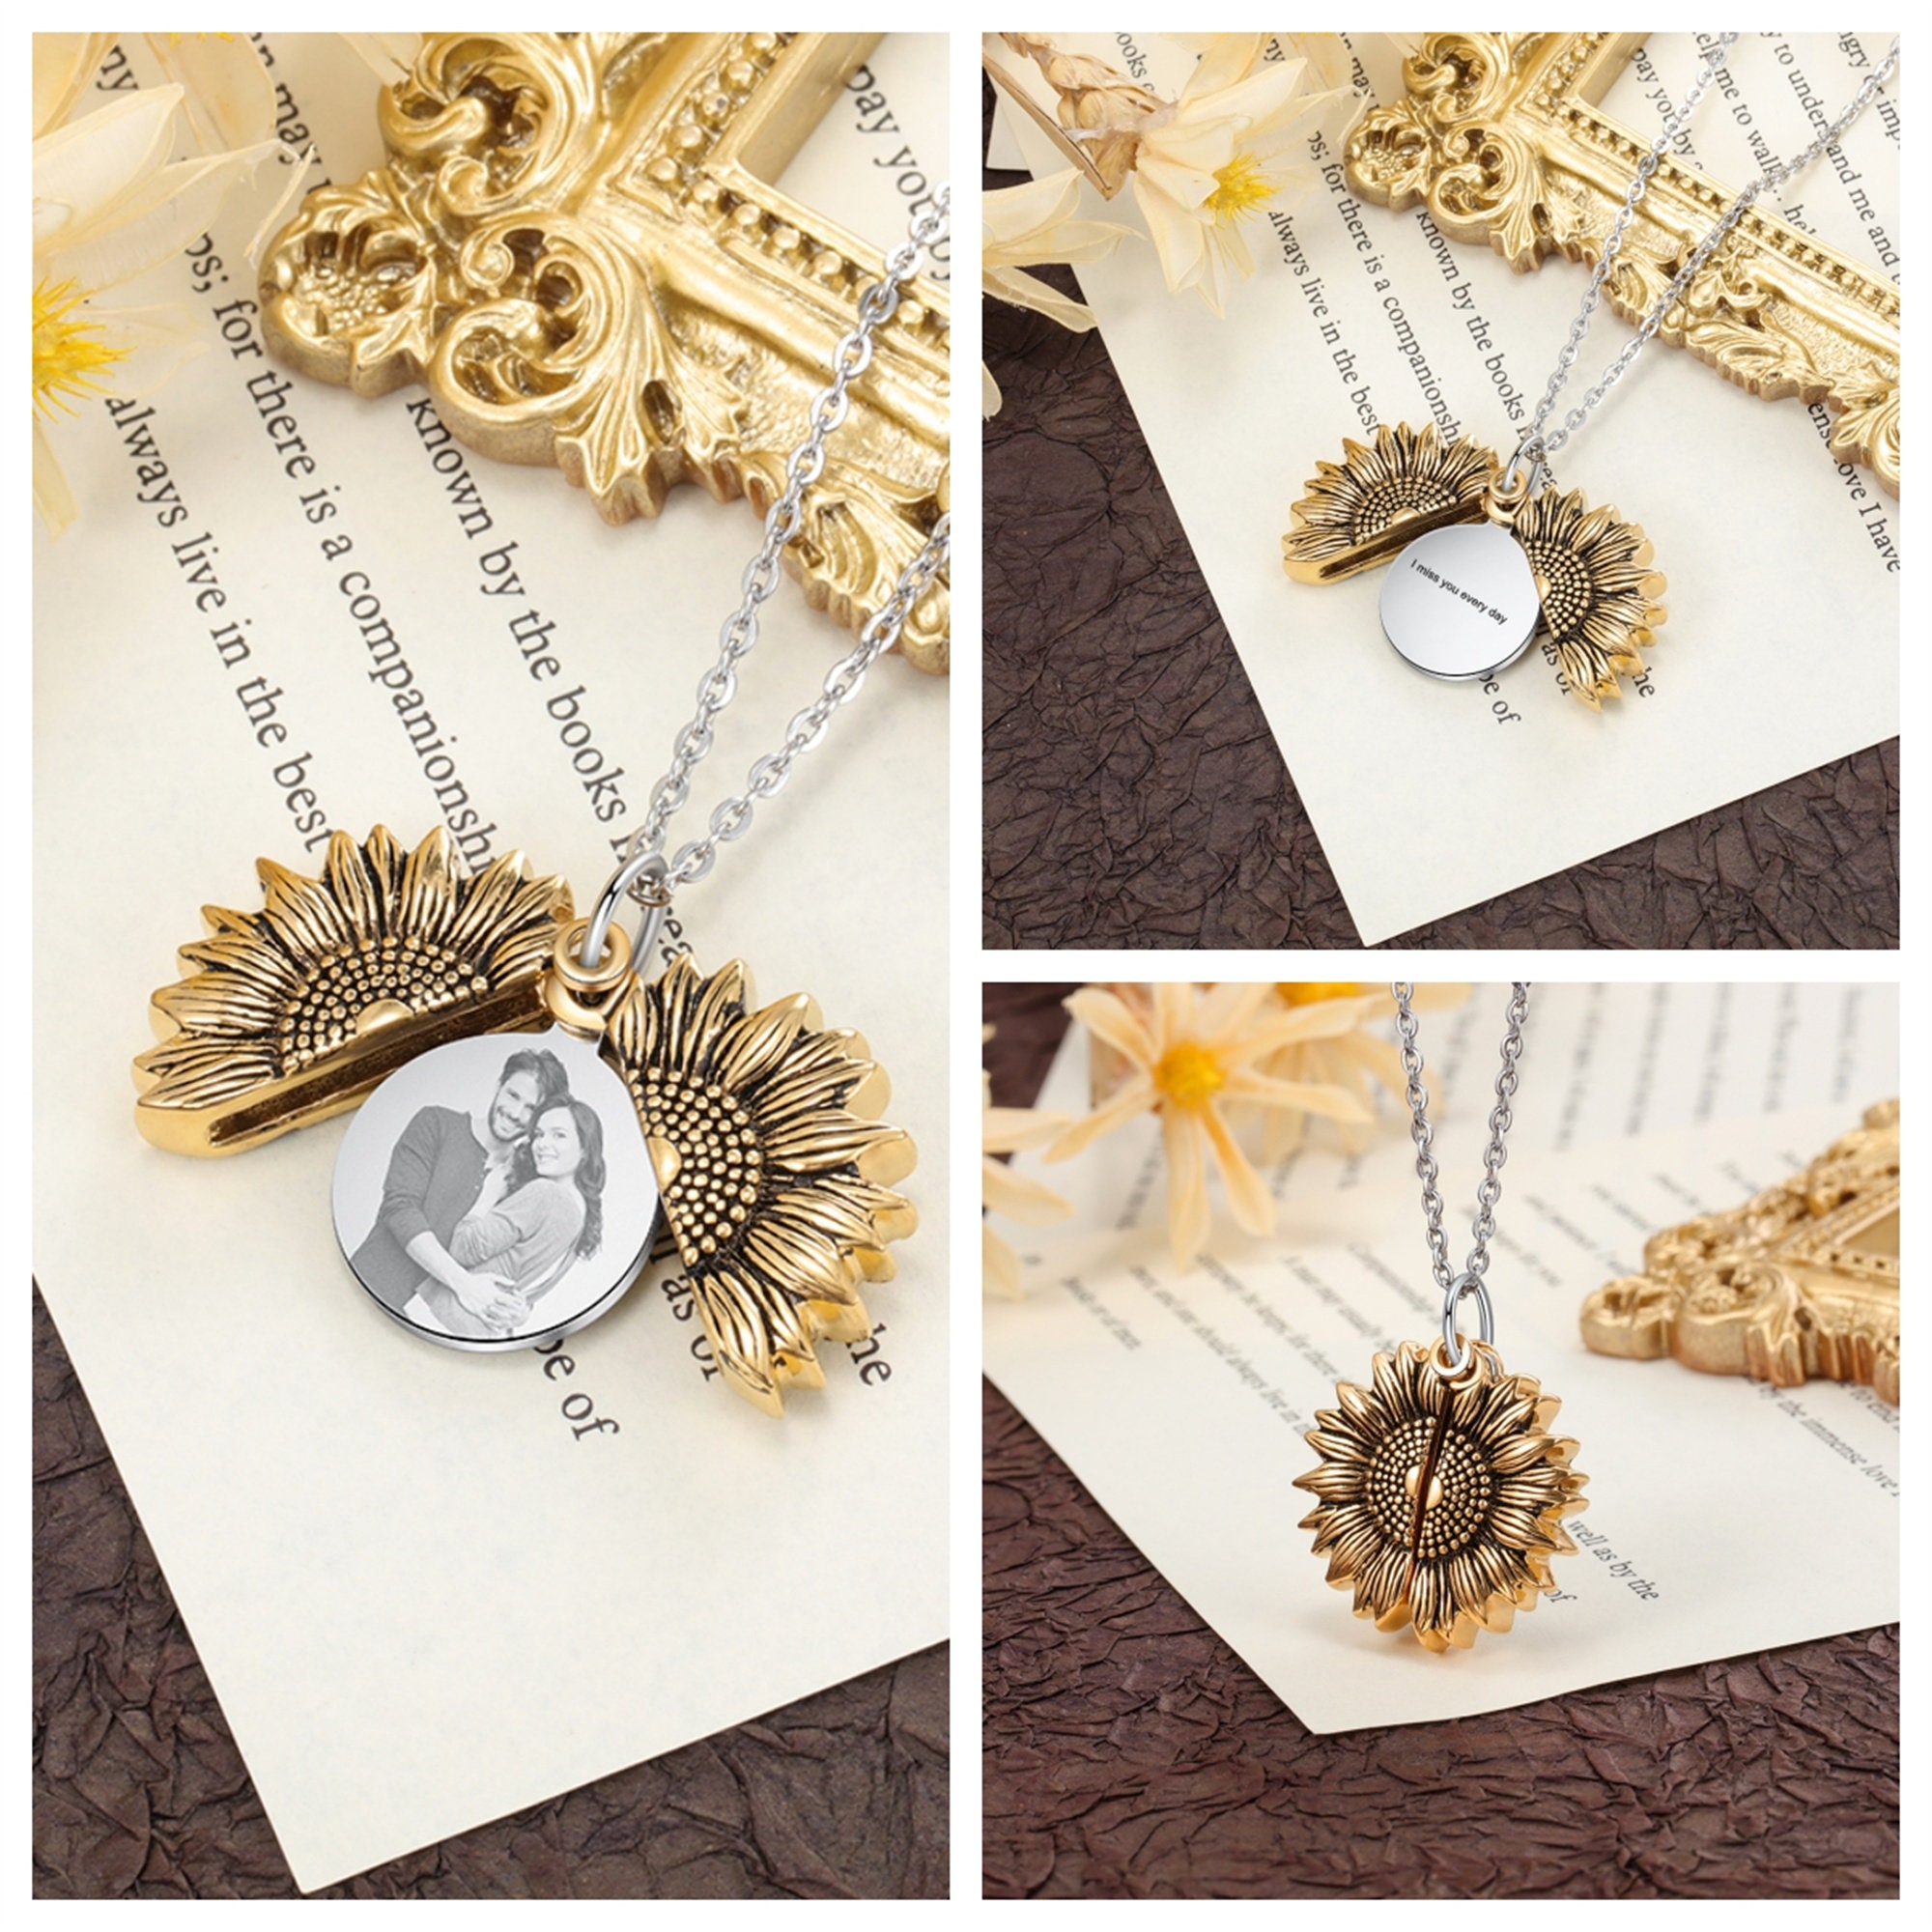 You Are My Sunshine Necklace - Anti Anxiety Rotatable Sunflower Necklace  for Women Girls, Inspirations Rotate Daisy Fidget necklace for Anxiety  Jewelry : Amazon.co.uk: Fashion